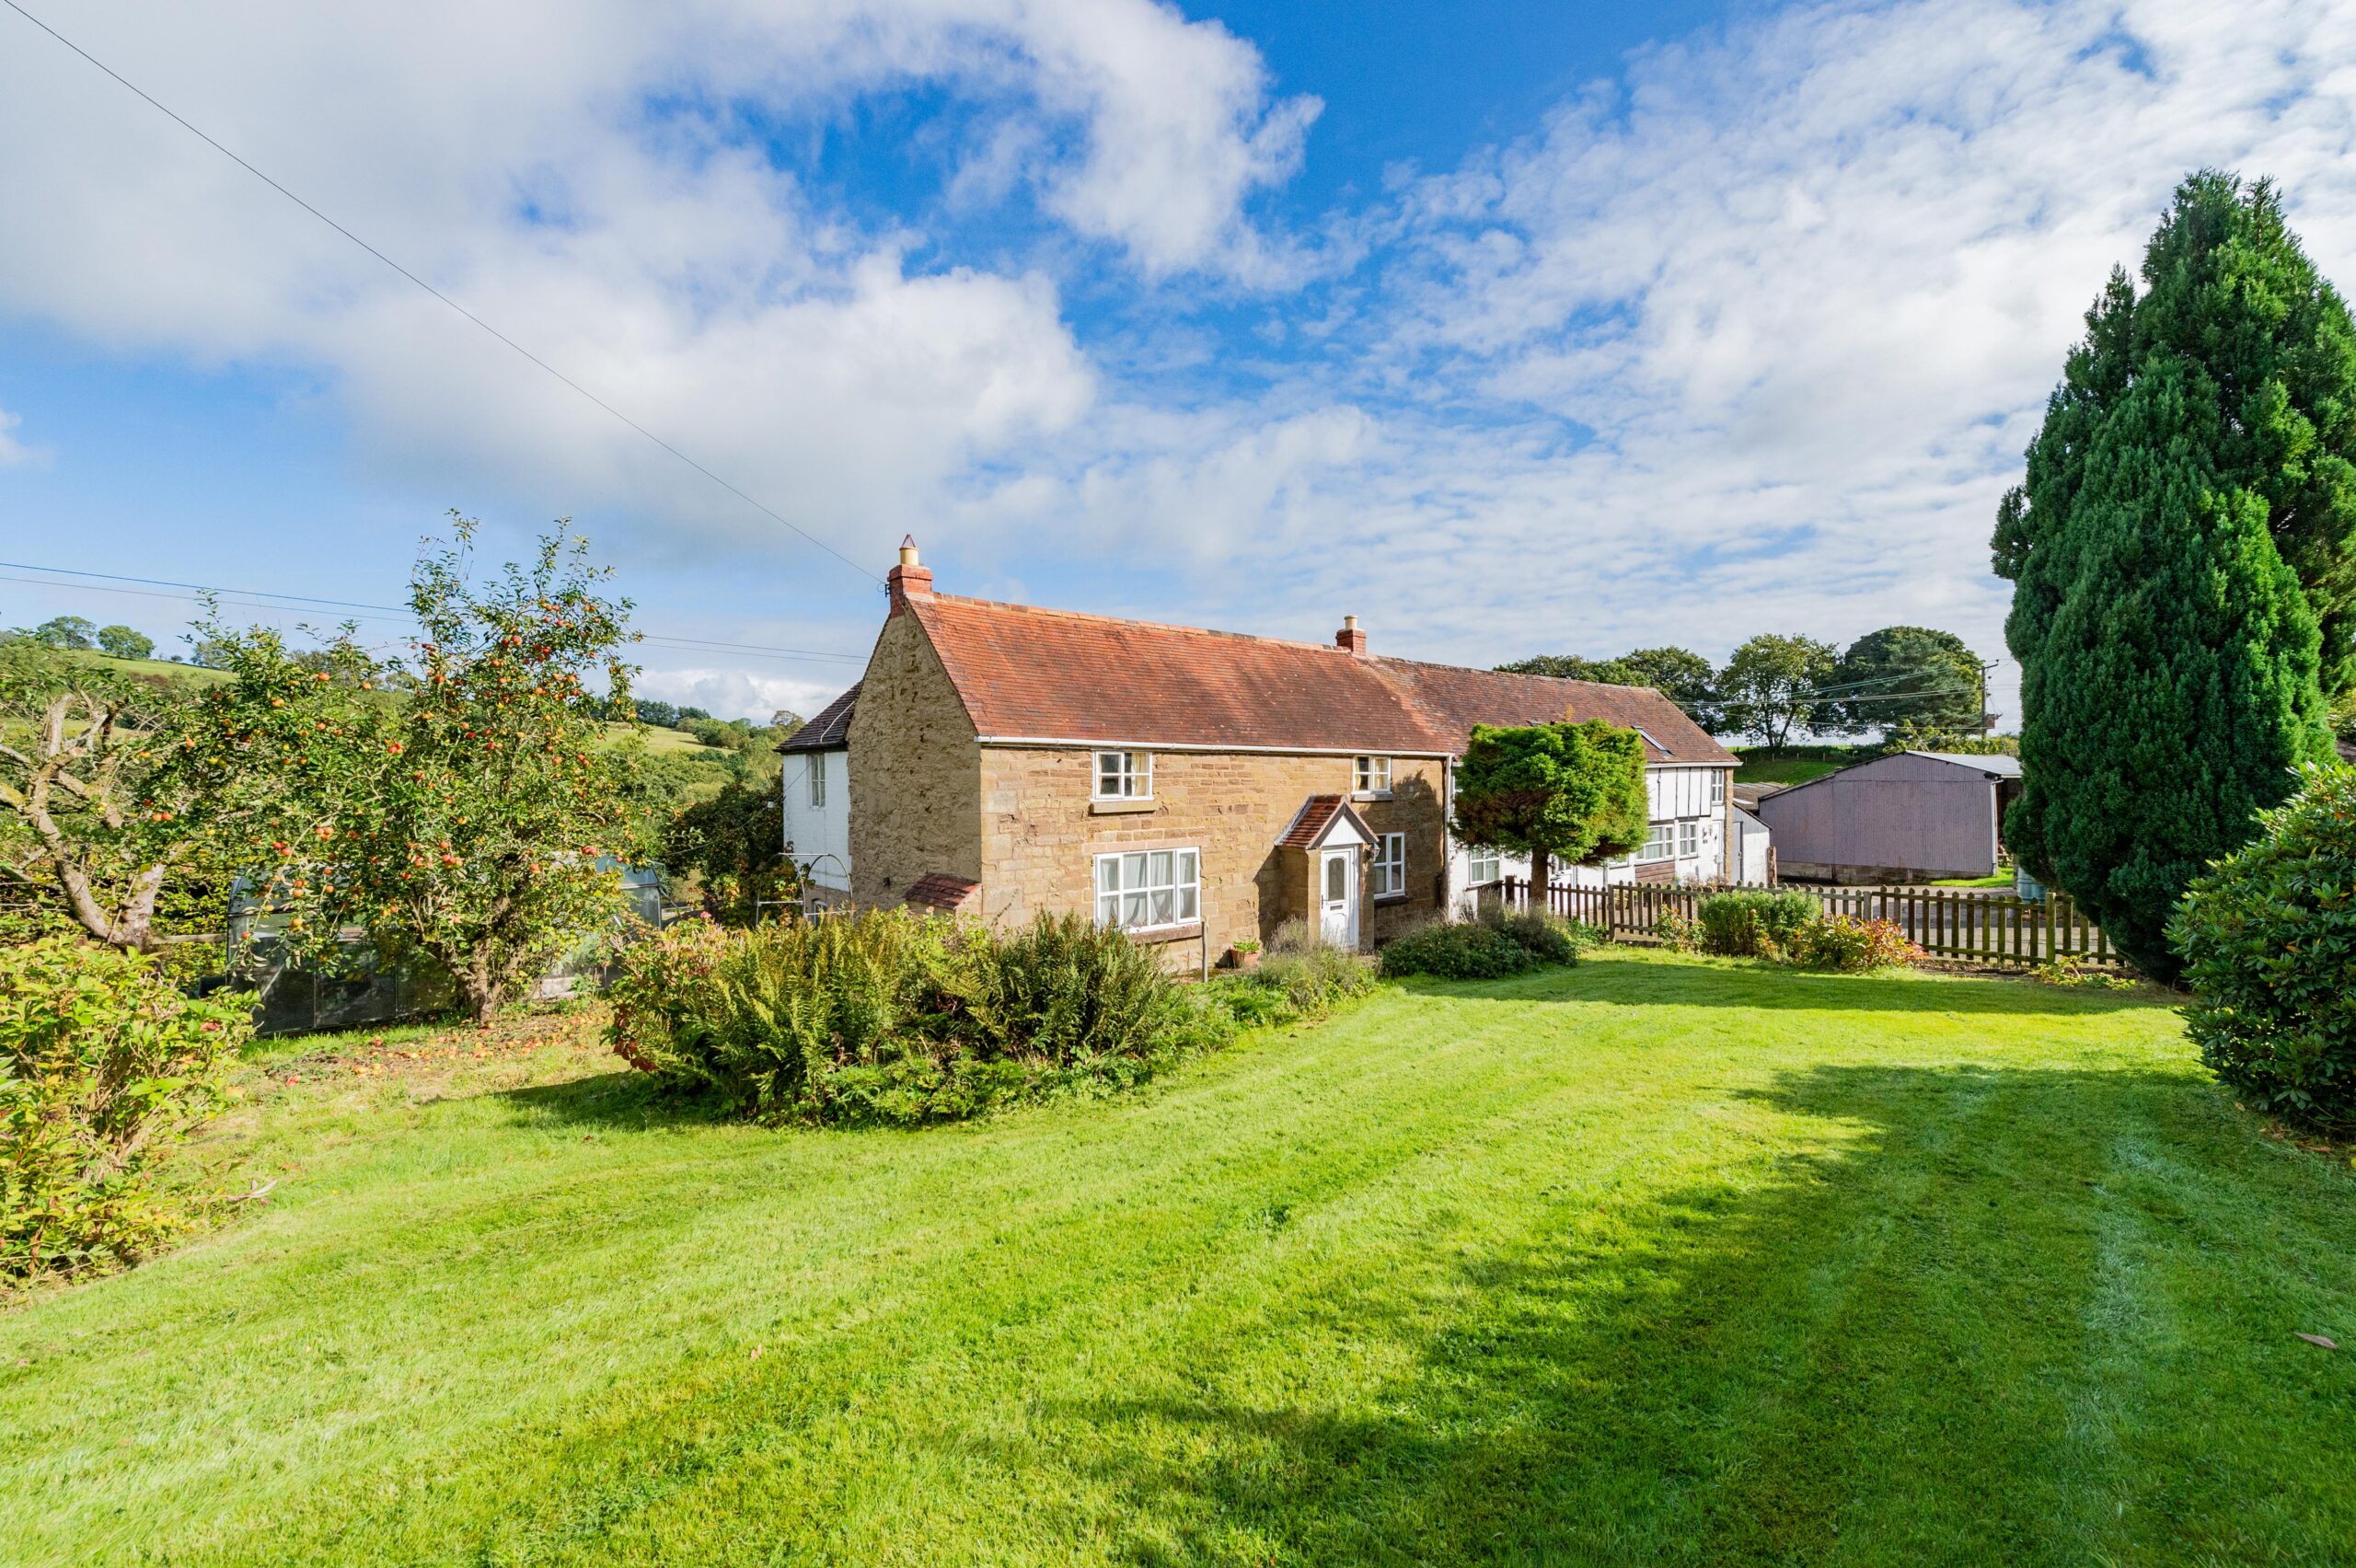 Woodgate Farm – Farmhouse and annex with land in AONB